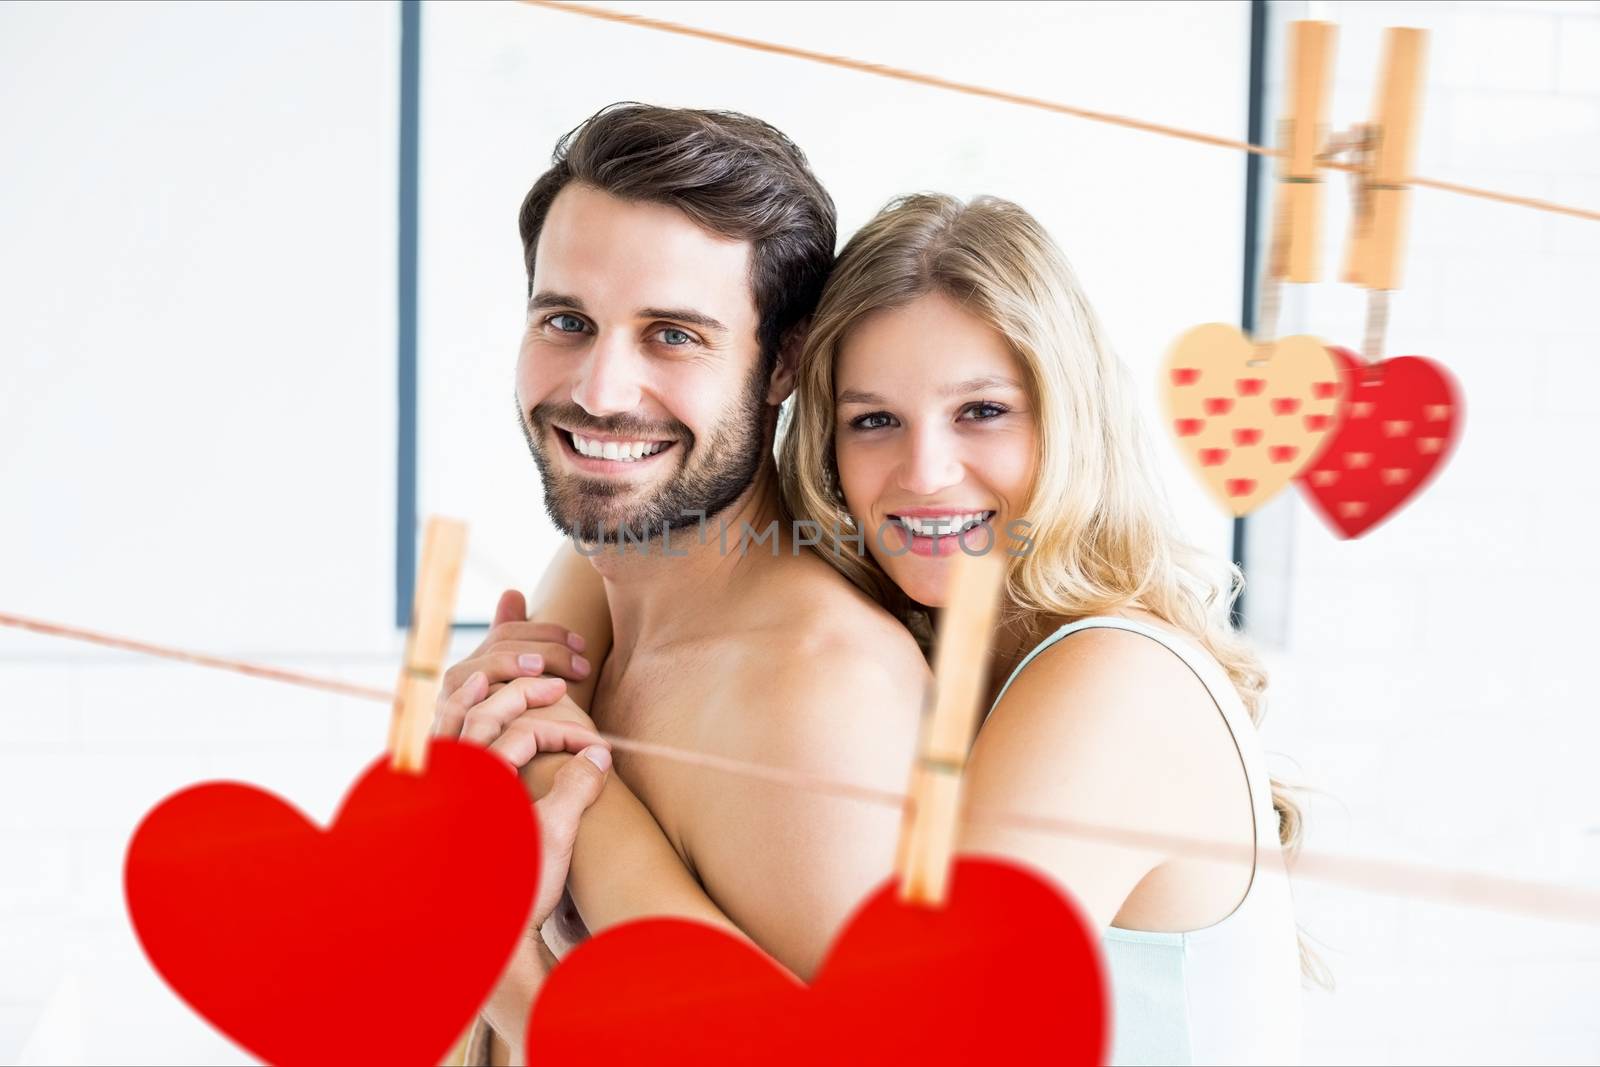 Composite image of romantic couple embracing with red hearts hanging on line